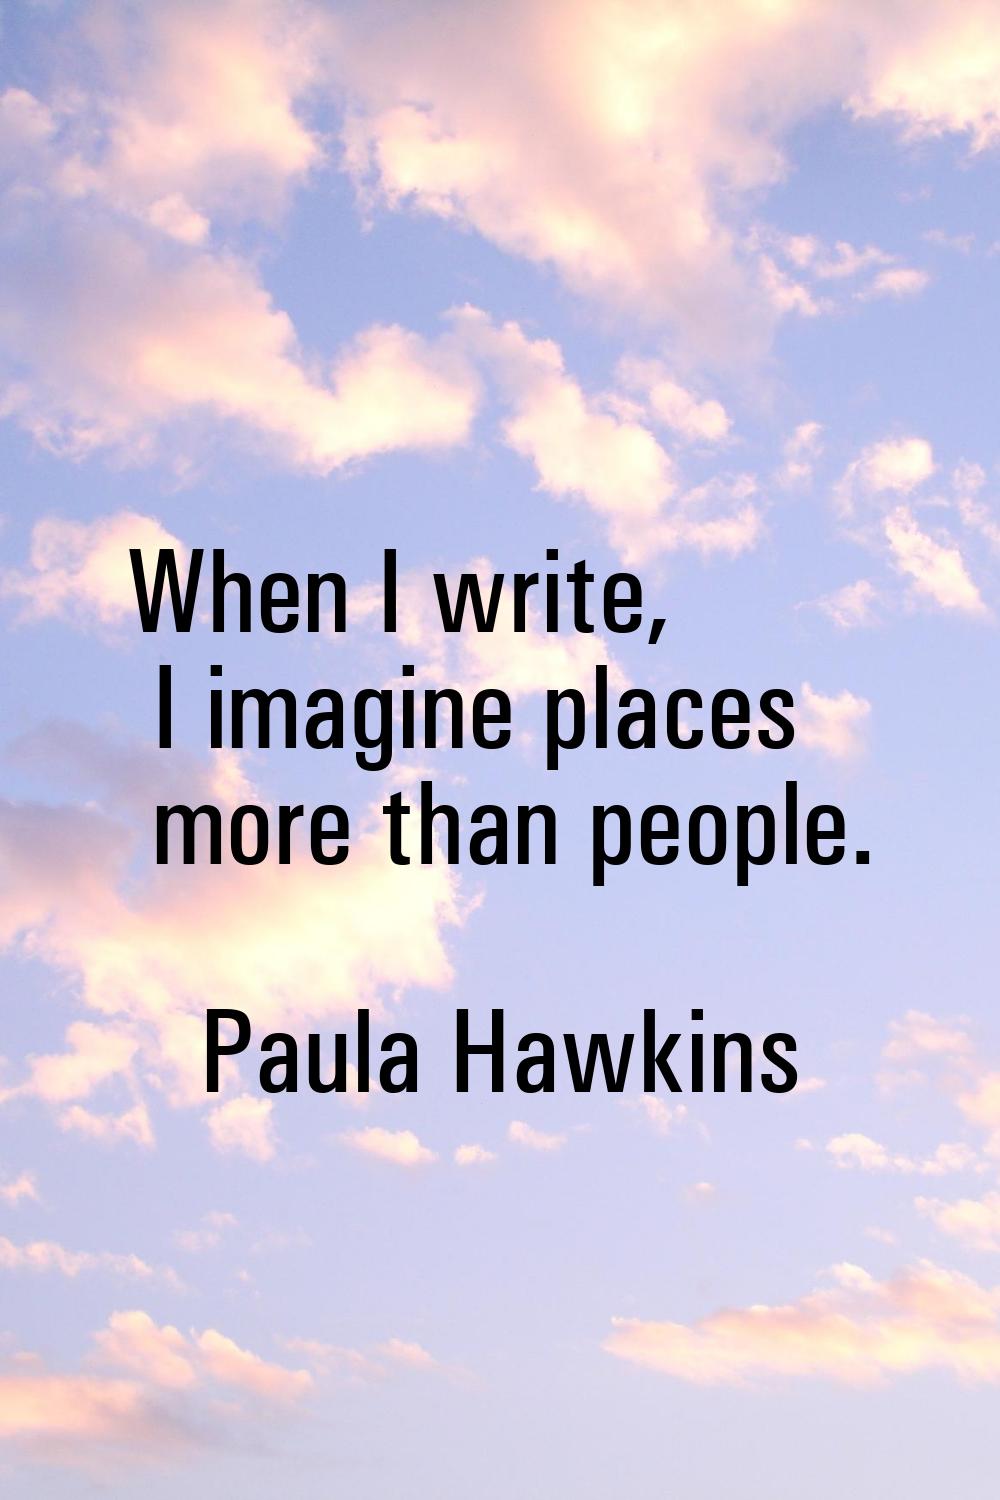 When I write, I imagine places more than people.